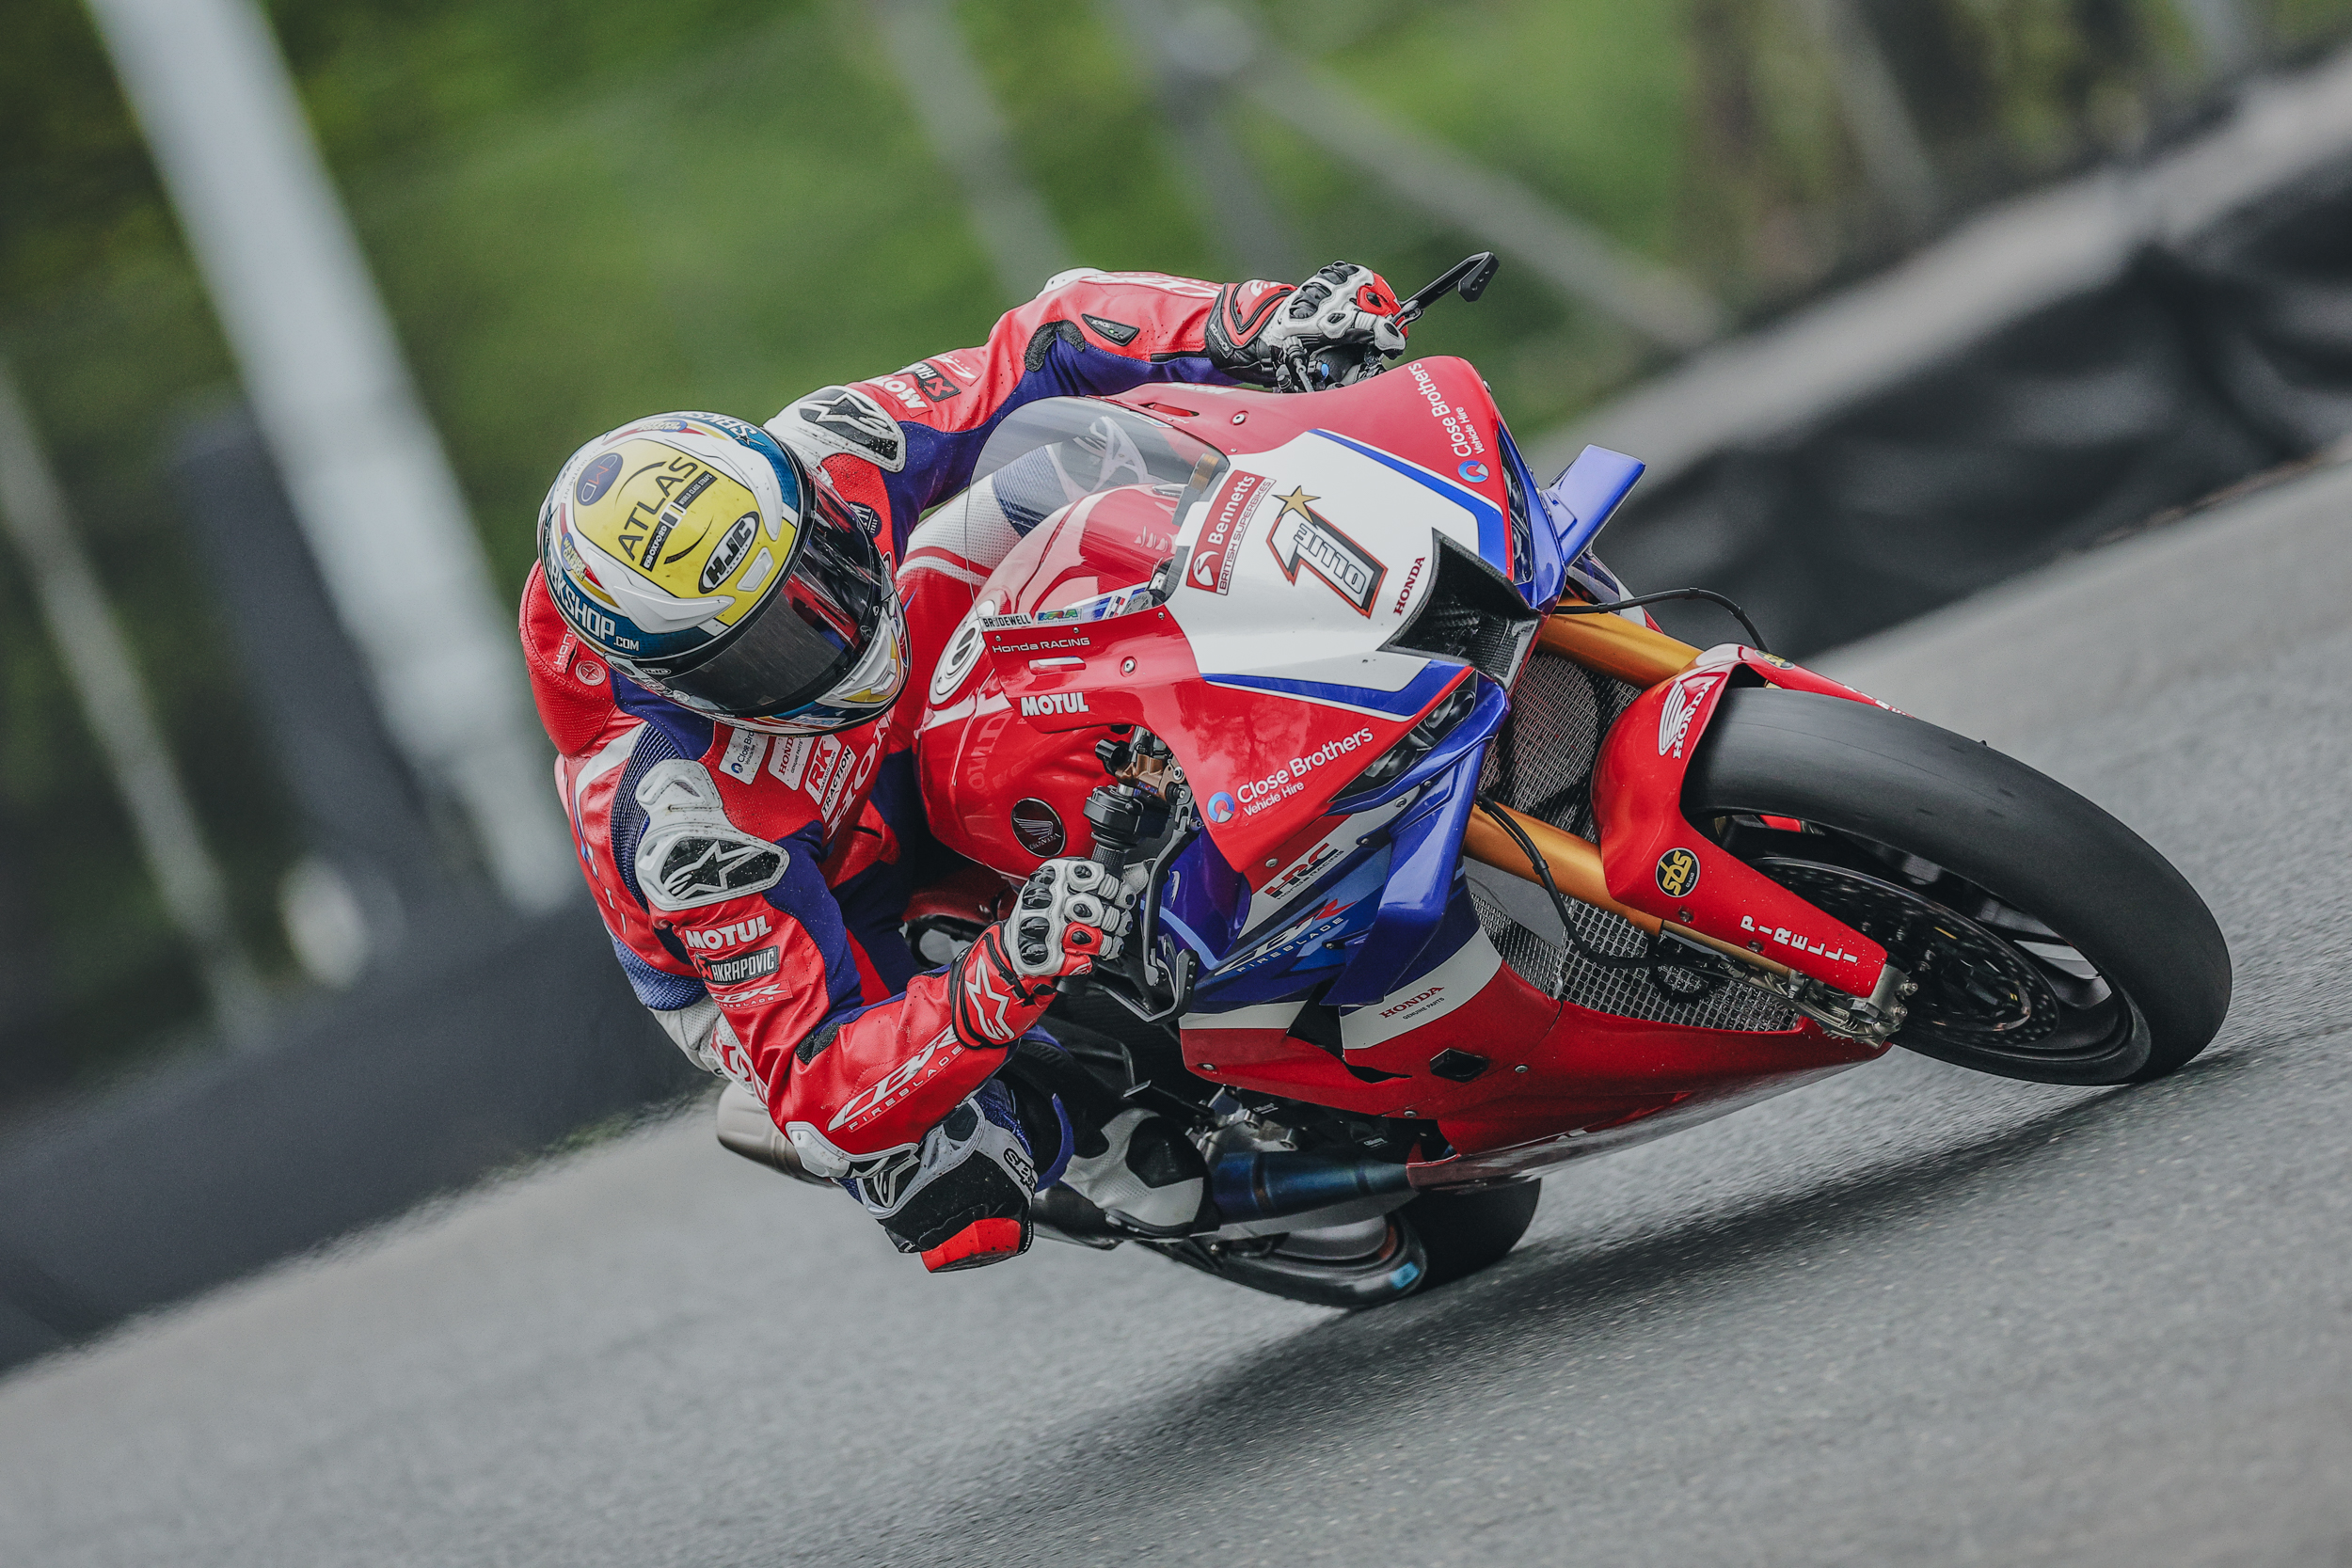 Irwin Leads The Way At Oulton Park